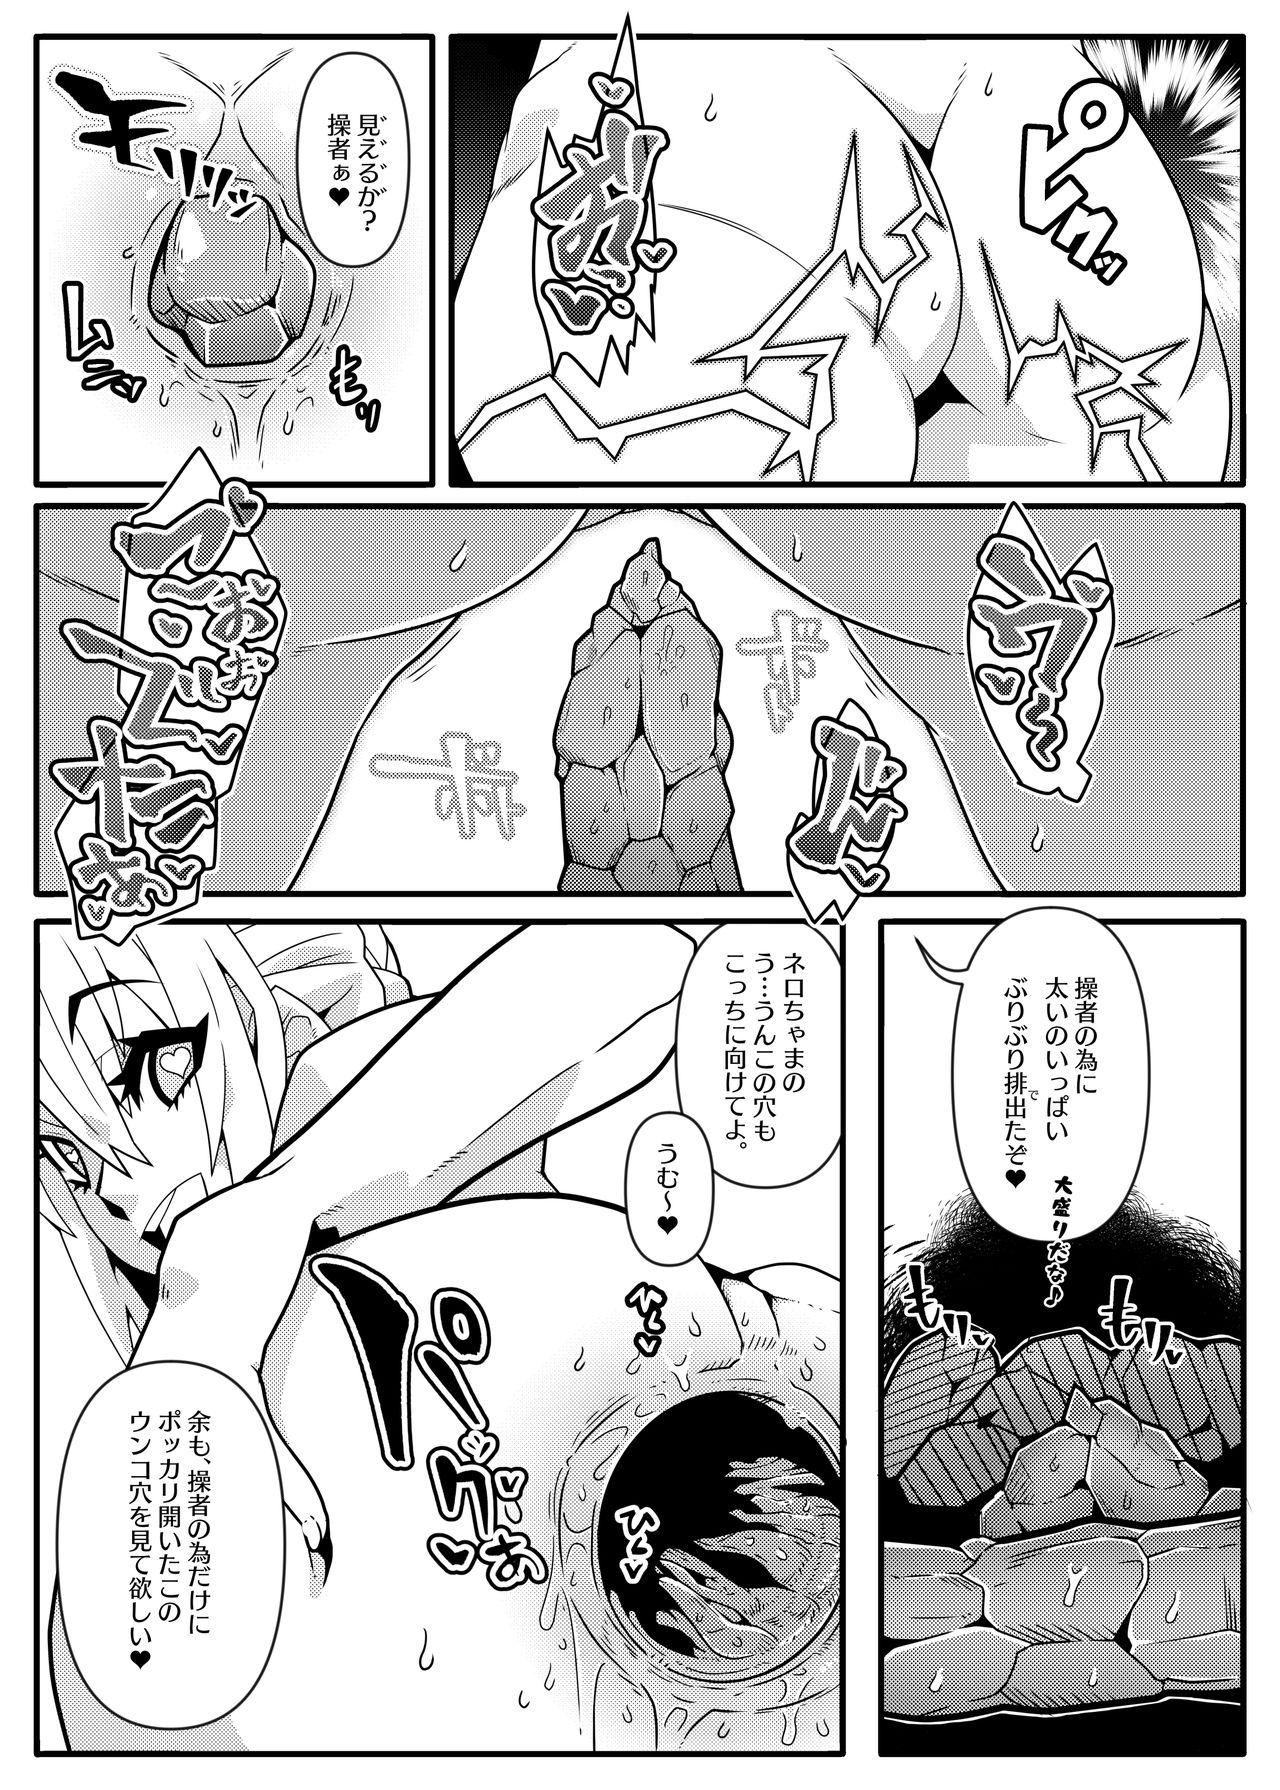 Wild MIND CONTROL GIRL 14 - Fate grand order Load - Page 9